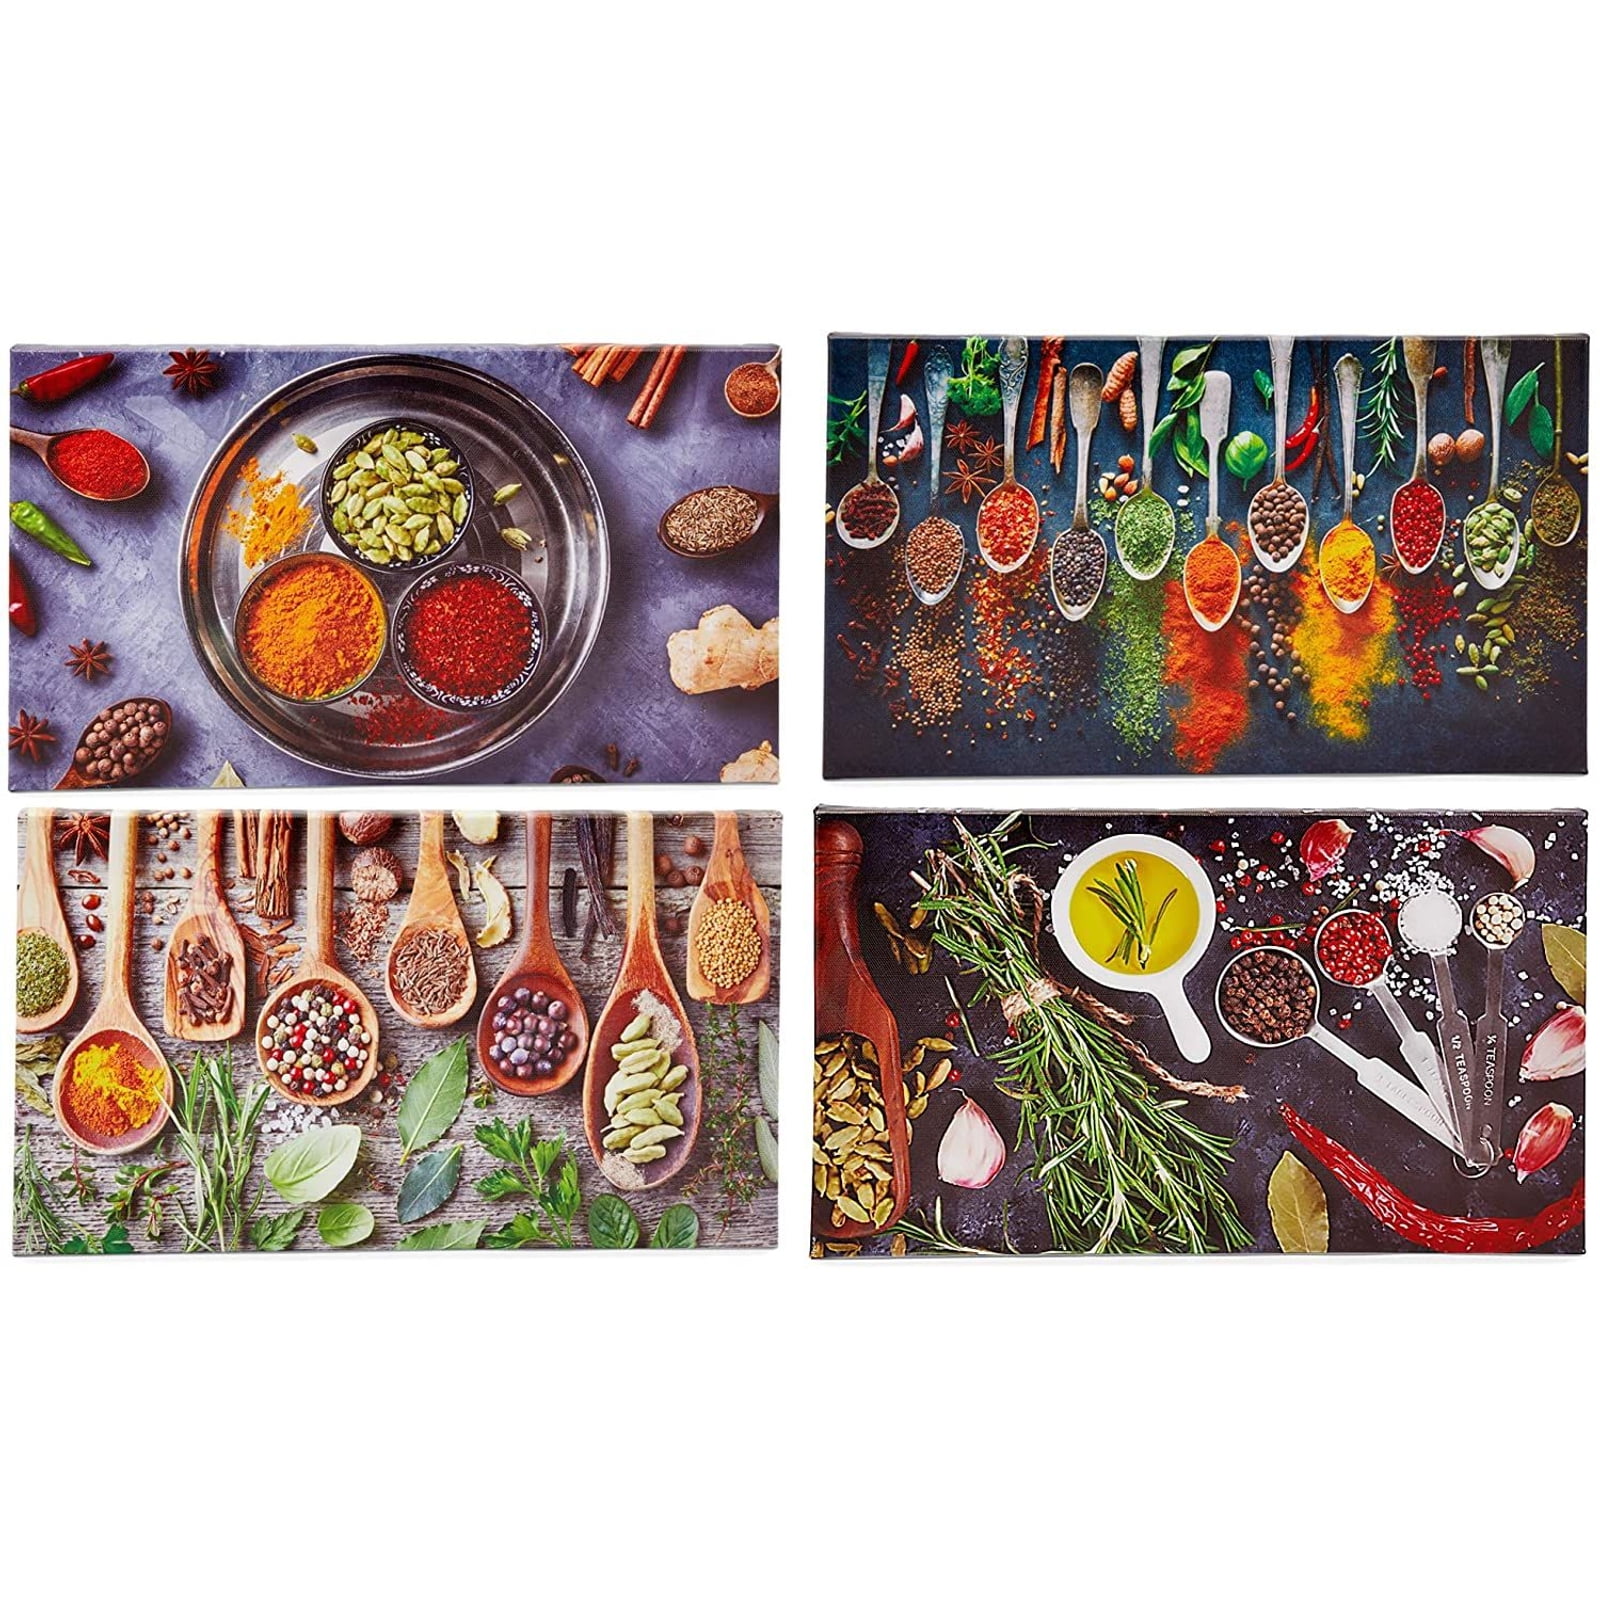 Metal Spoon and Spices Ingredient 5 Pc Canvas Wall Art Picture Poster Home Decor